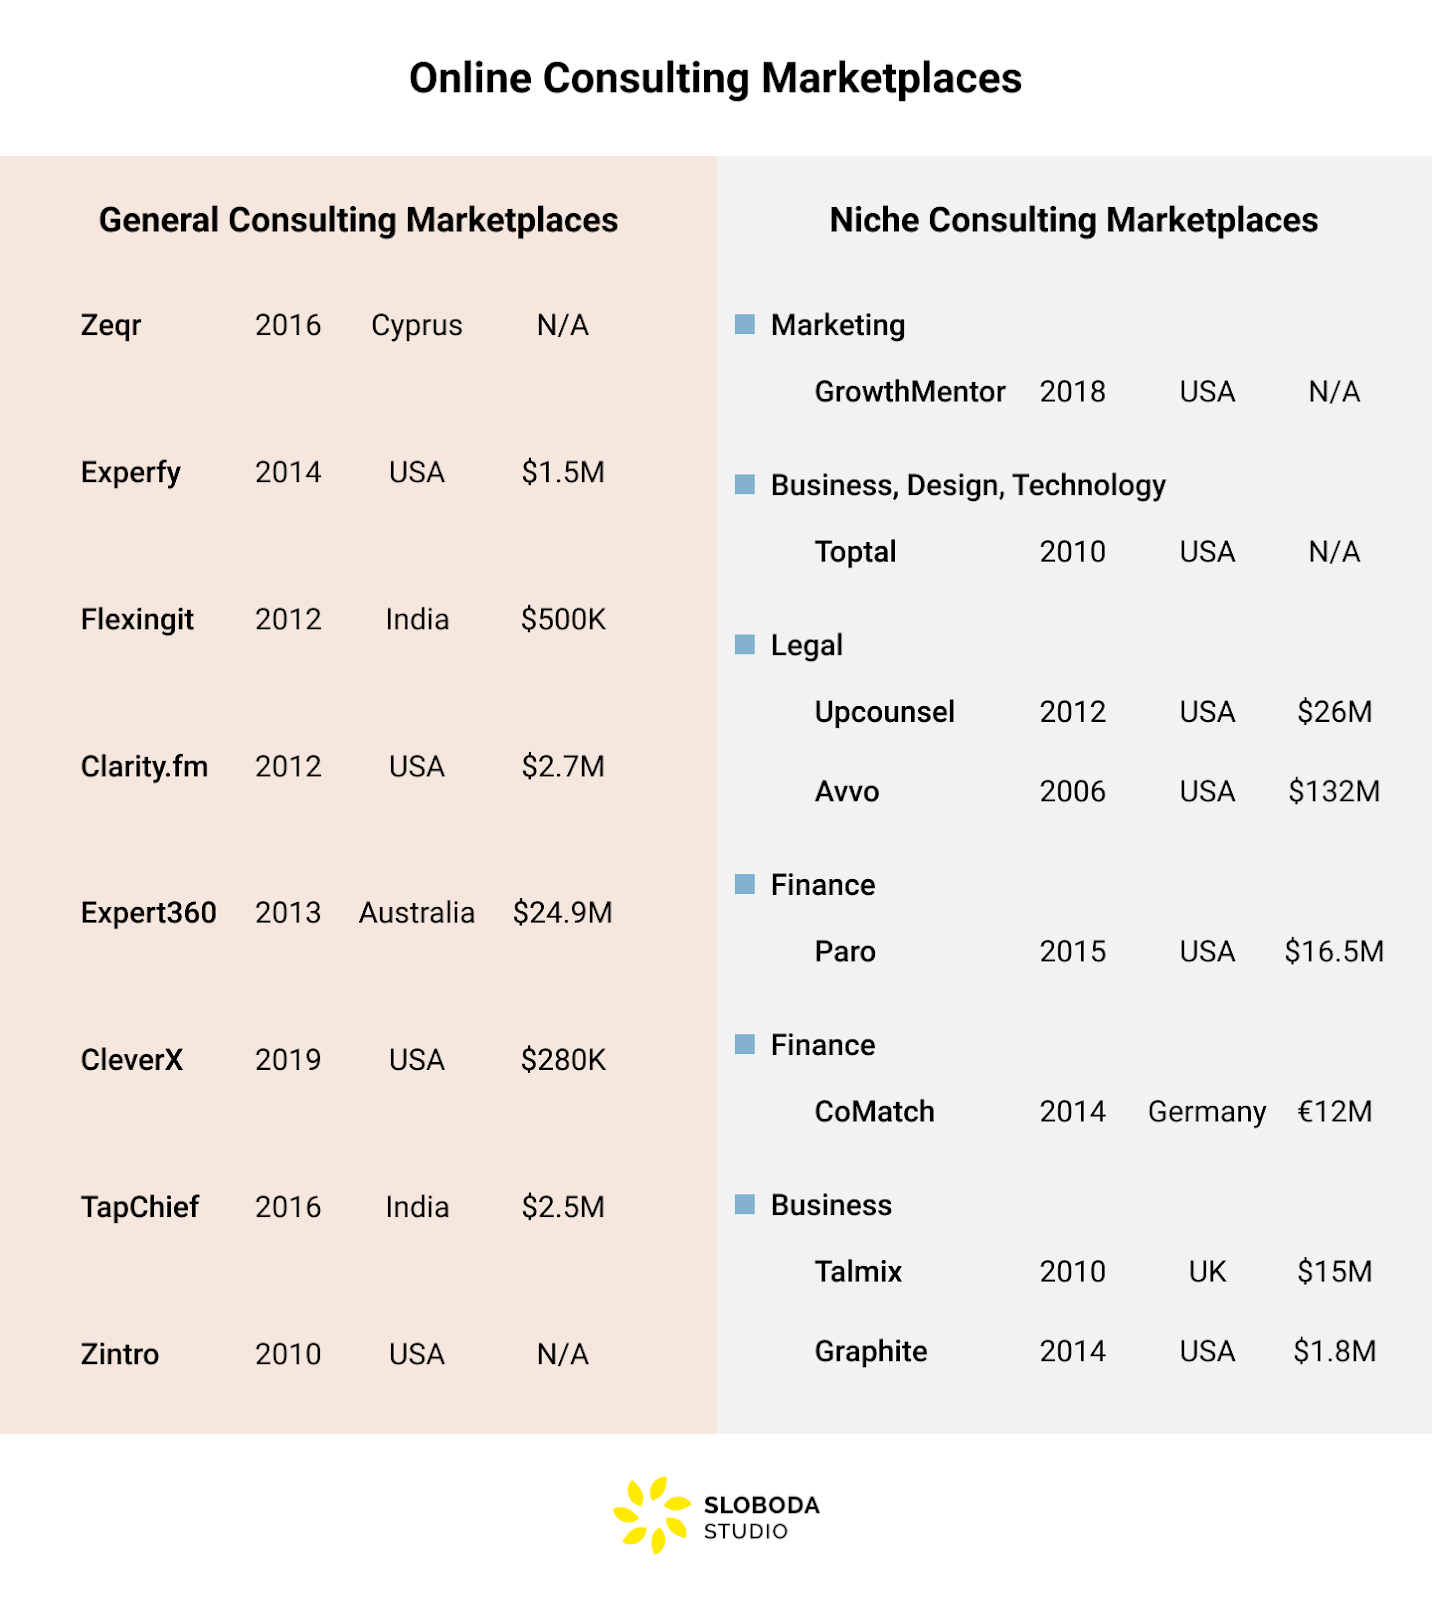 types of online consulting marketplaces